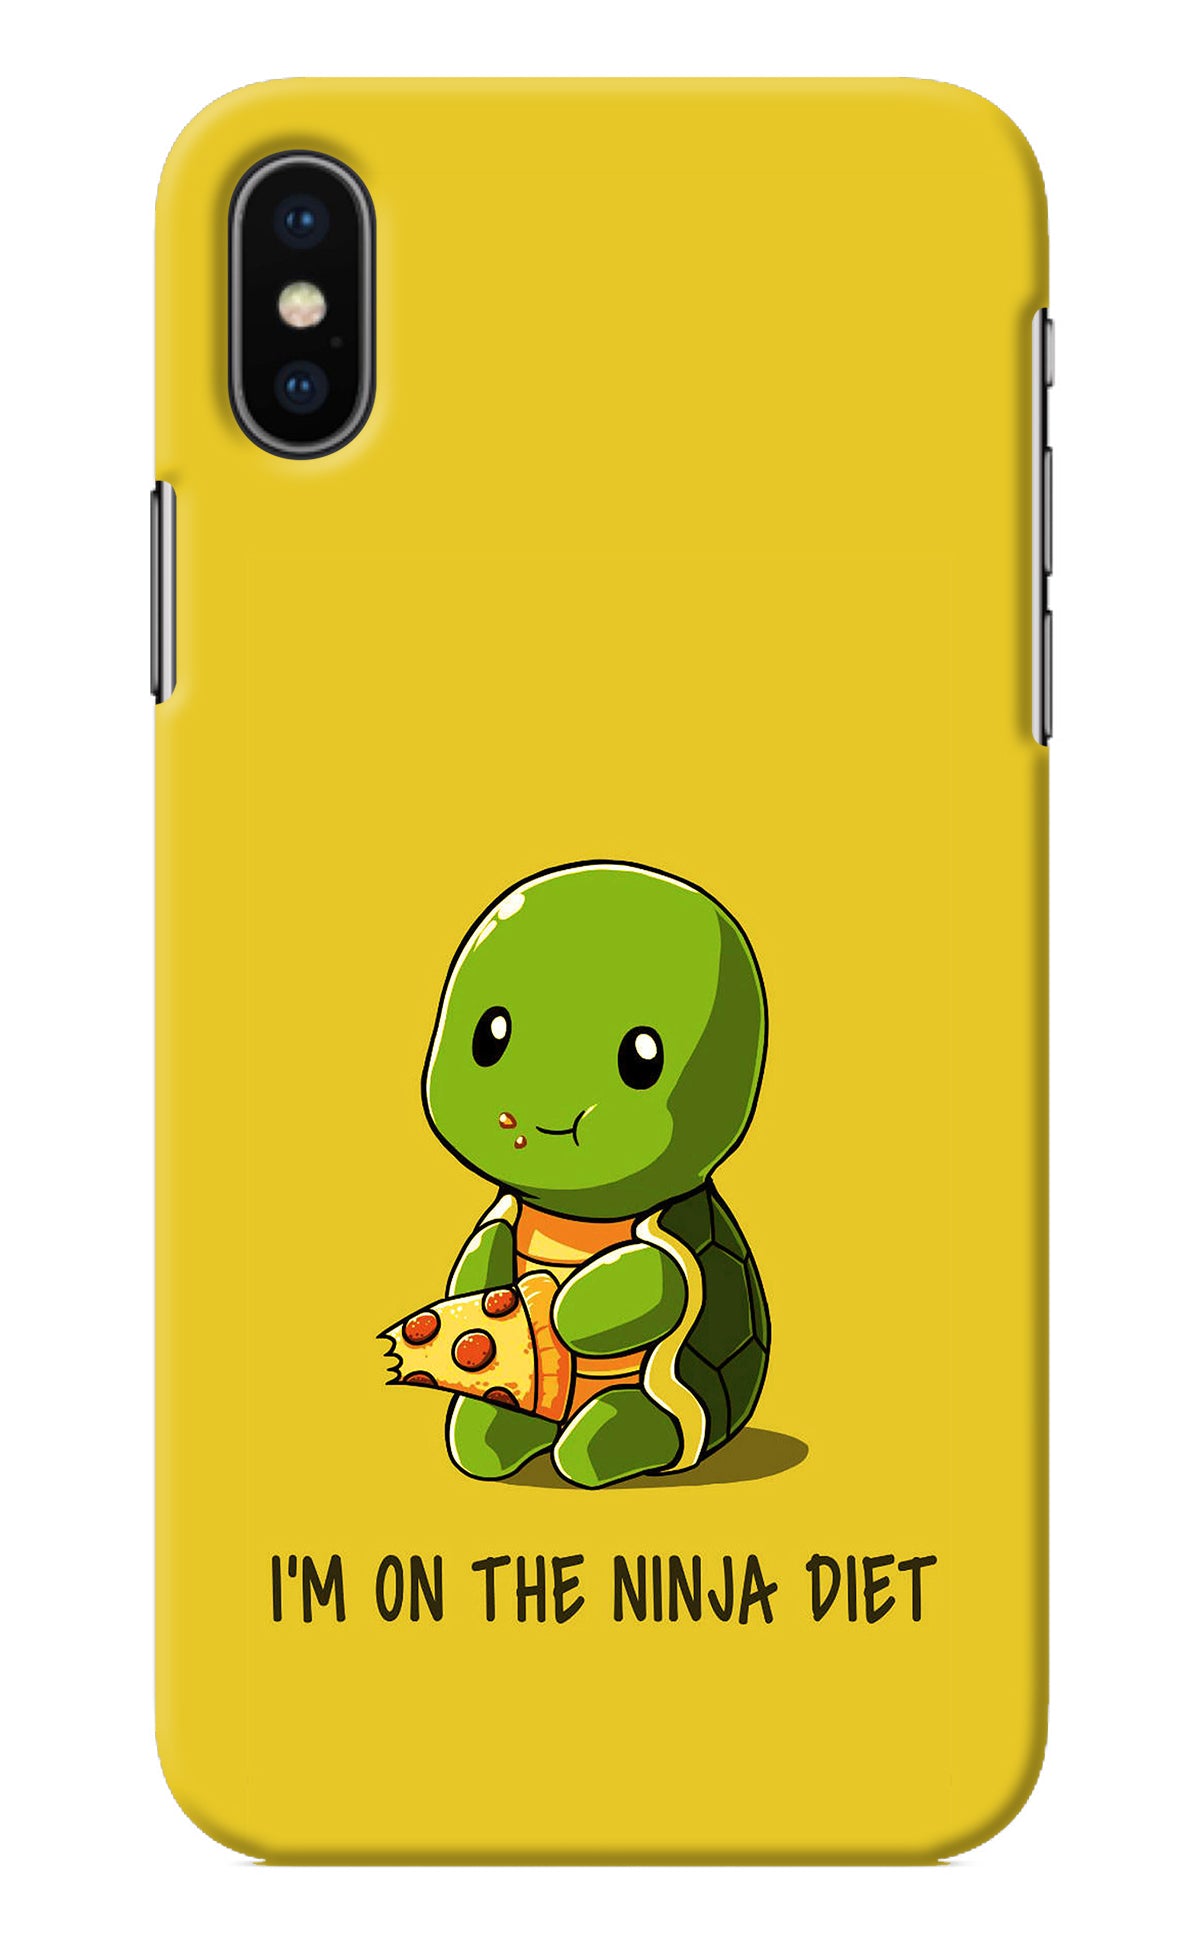 I'm on Ninja Diet iPhone X Back Cover